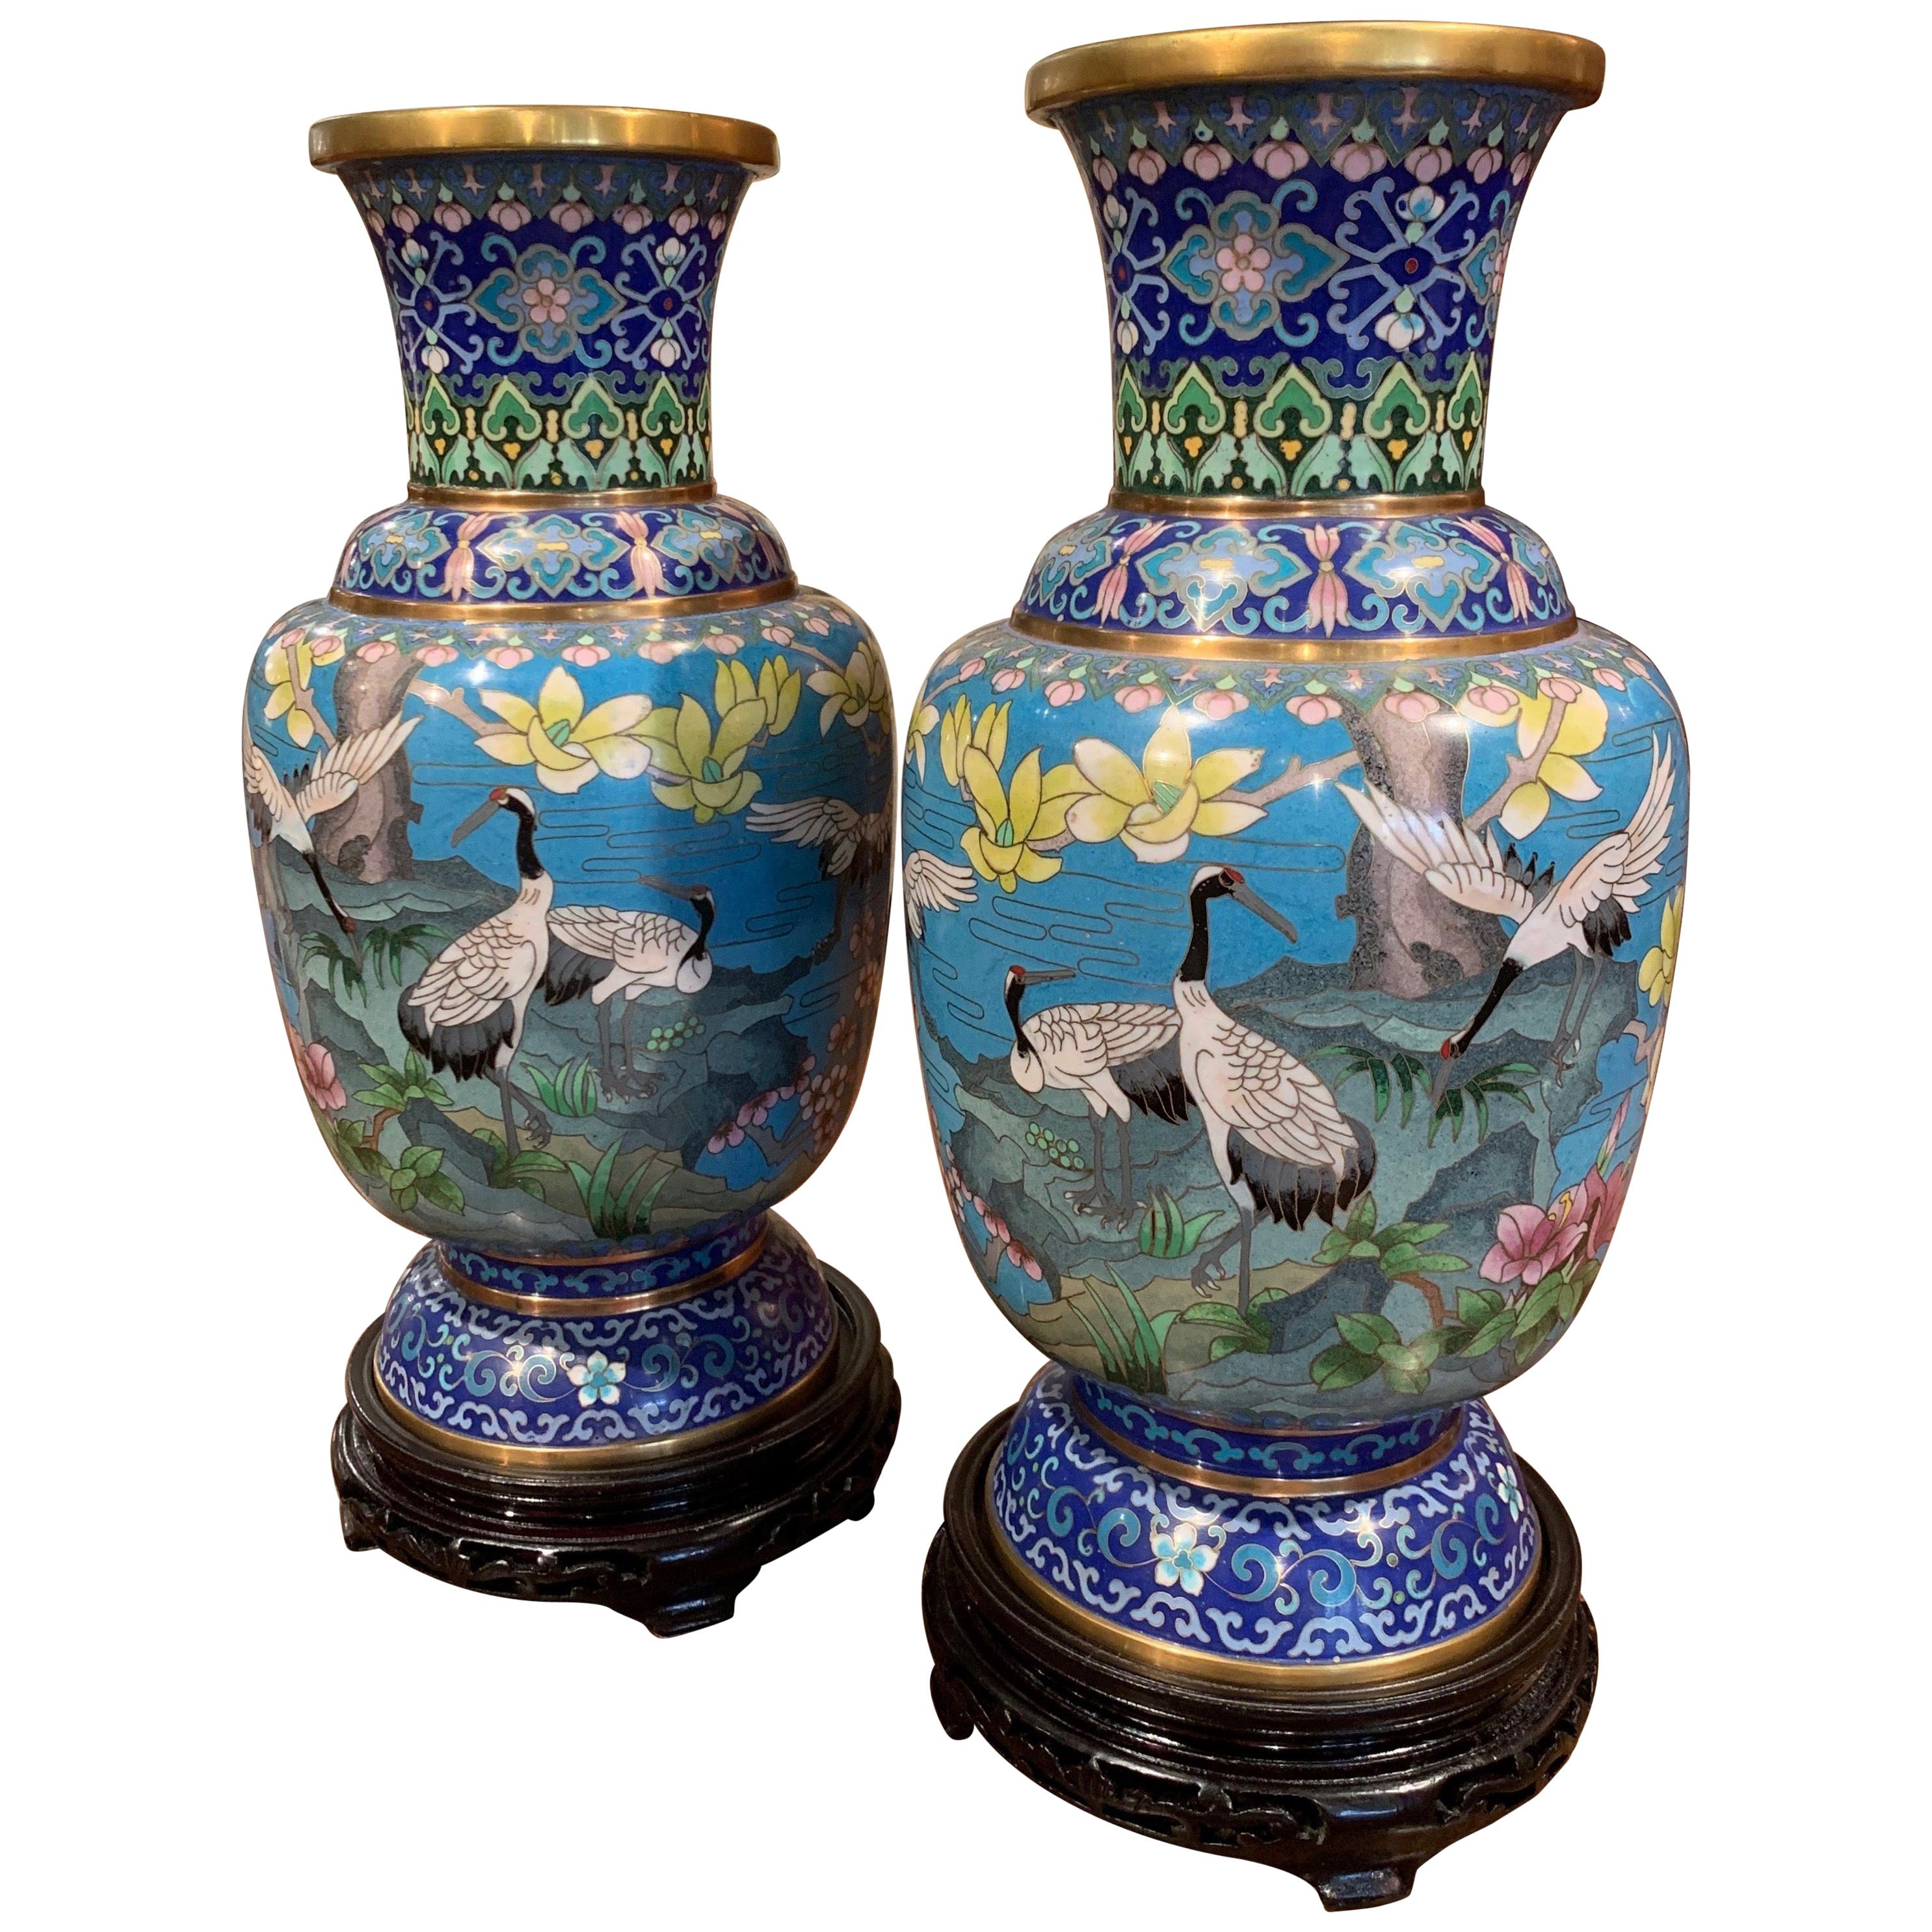 Pair of 20th Century Chinese Champlevé Enamel Vases on Stand with Bird Decor